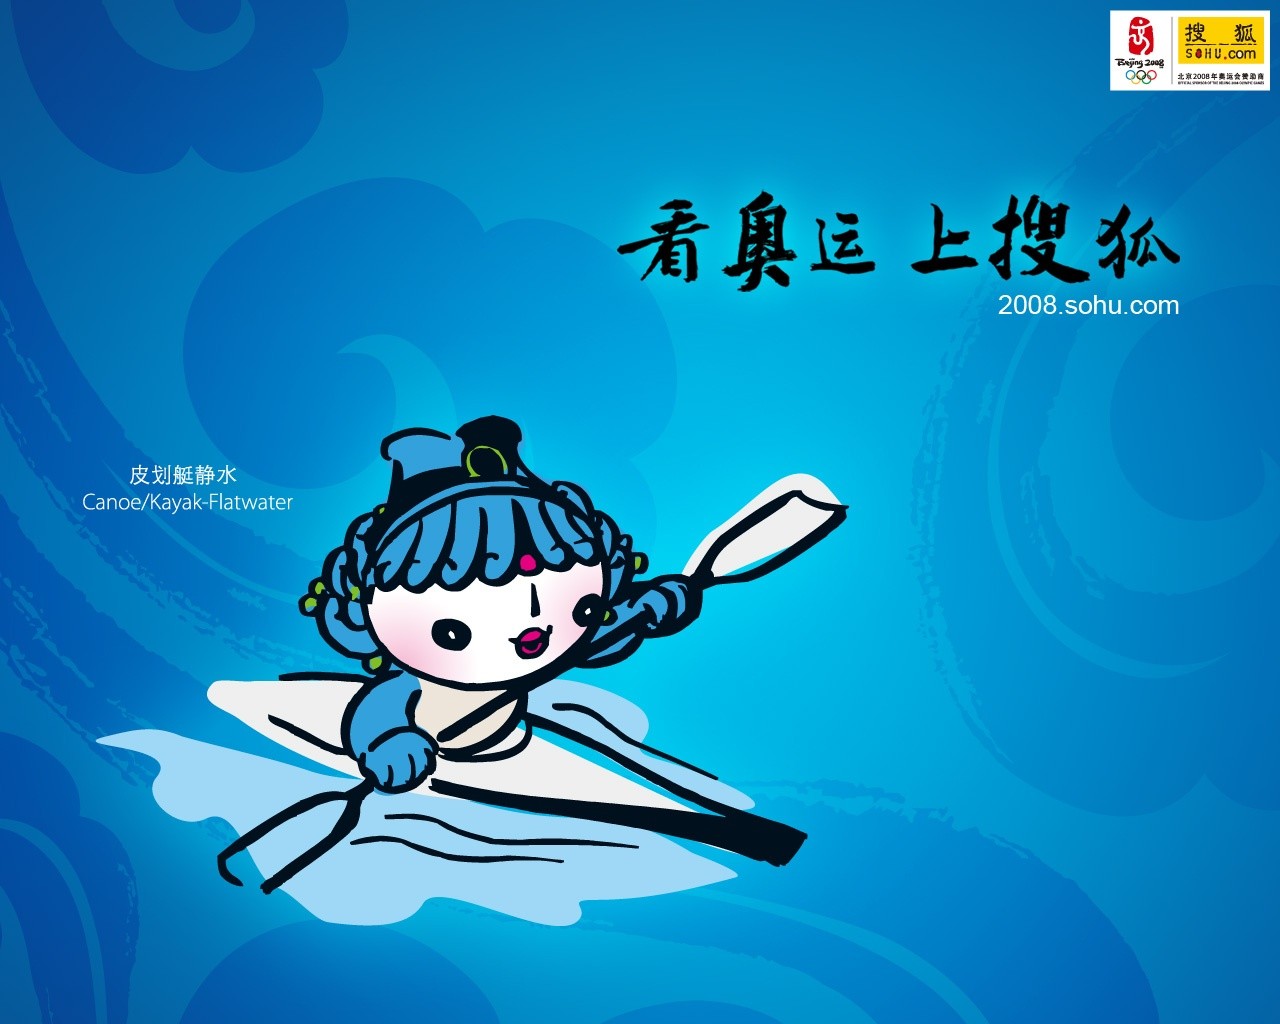 08 Olympic Games Fuwa Wallpapers #15 - 1280x1024